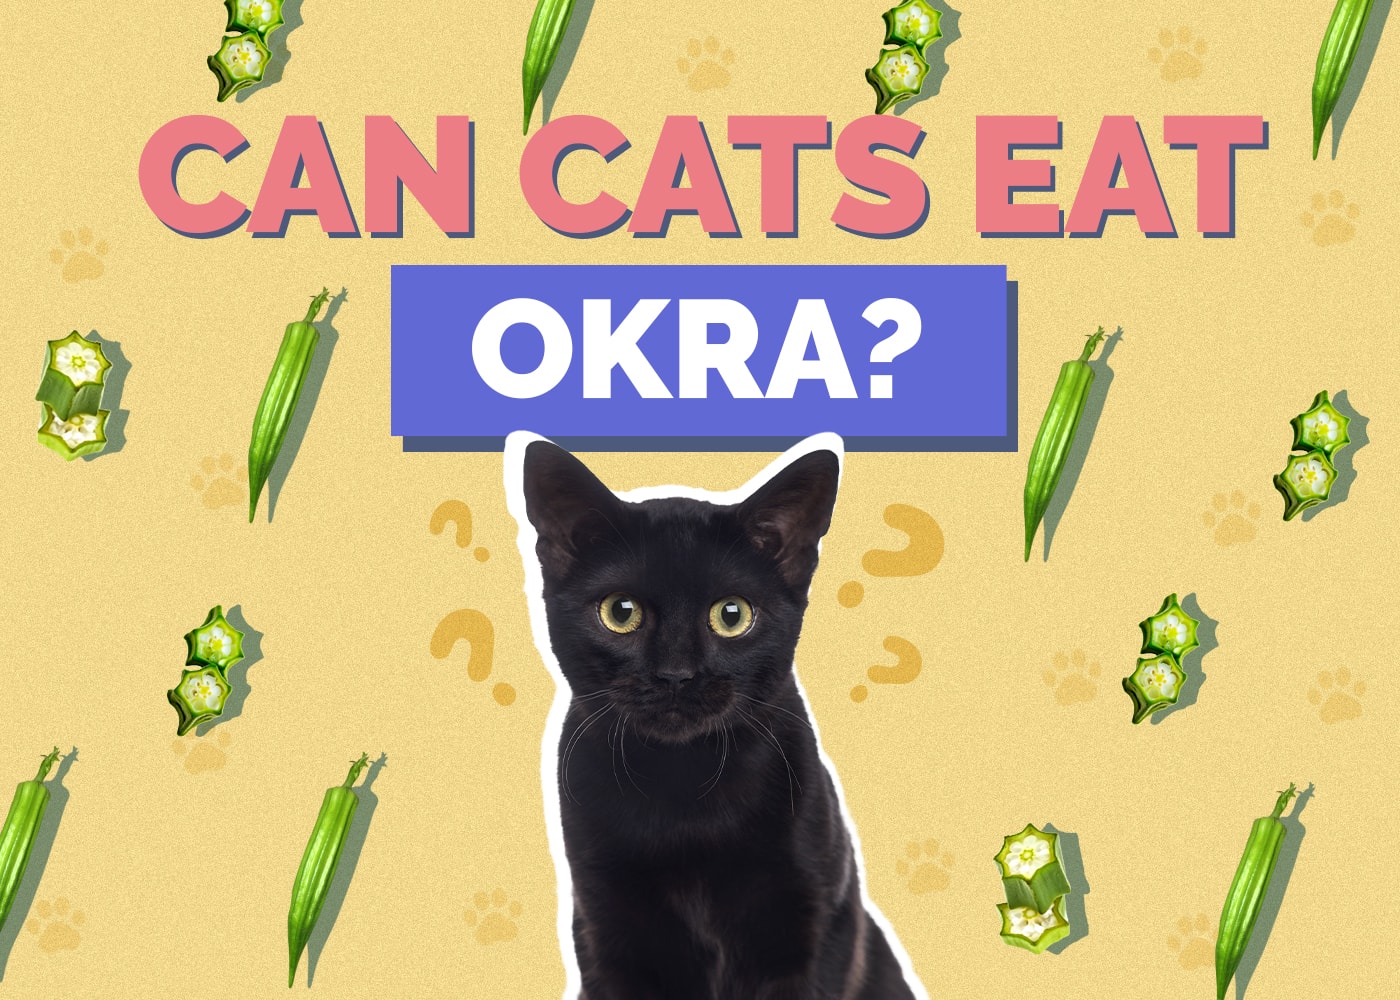 Can Cats Eat okra